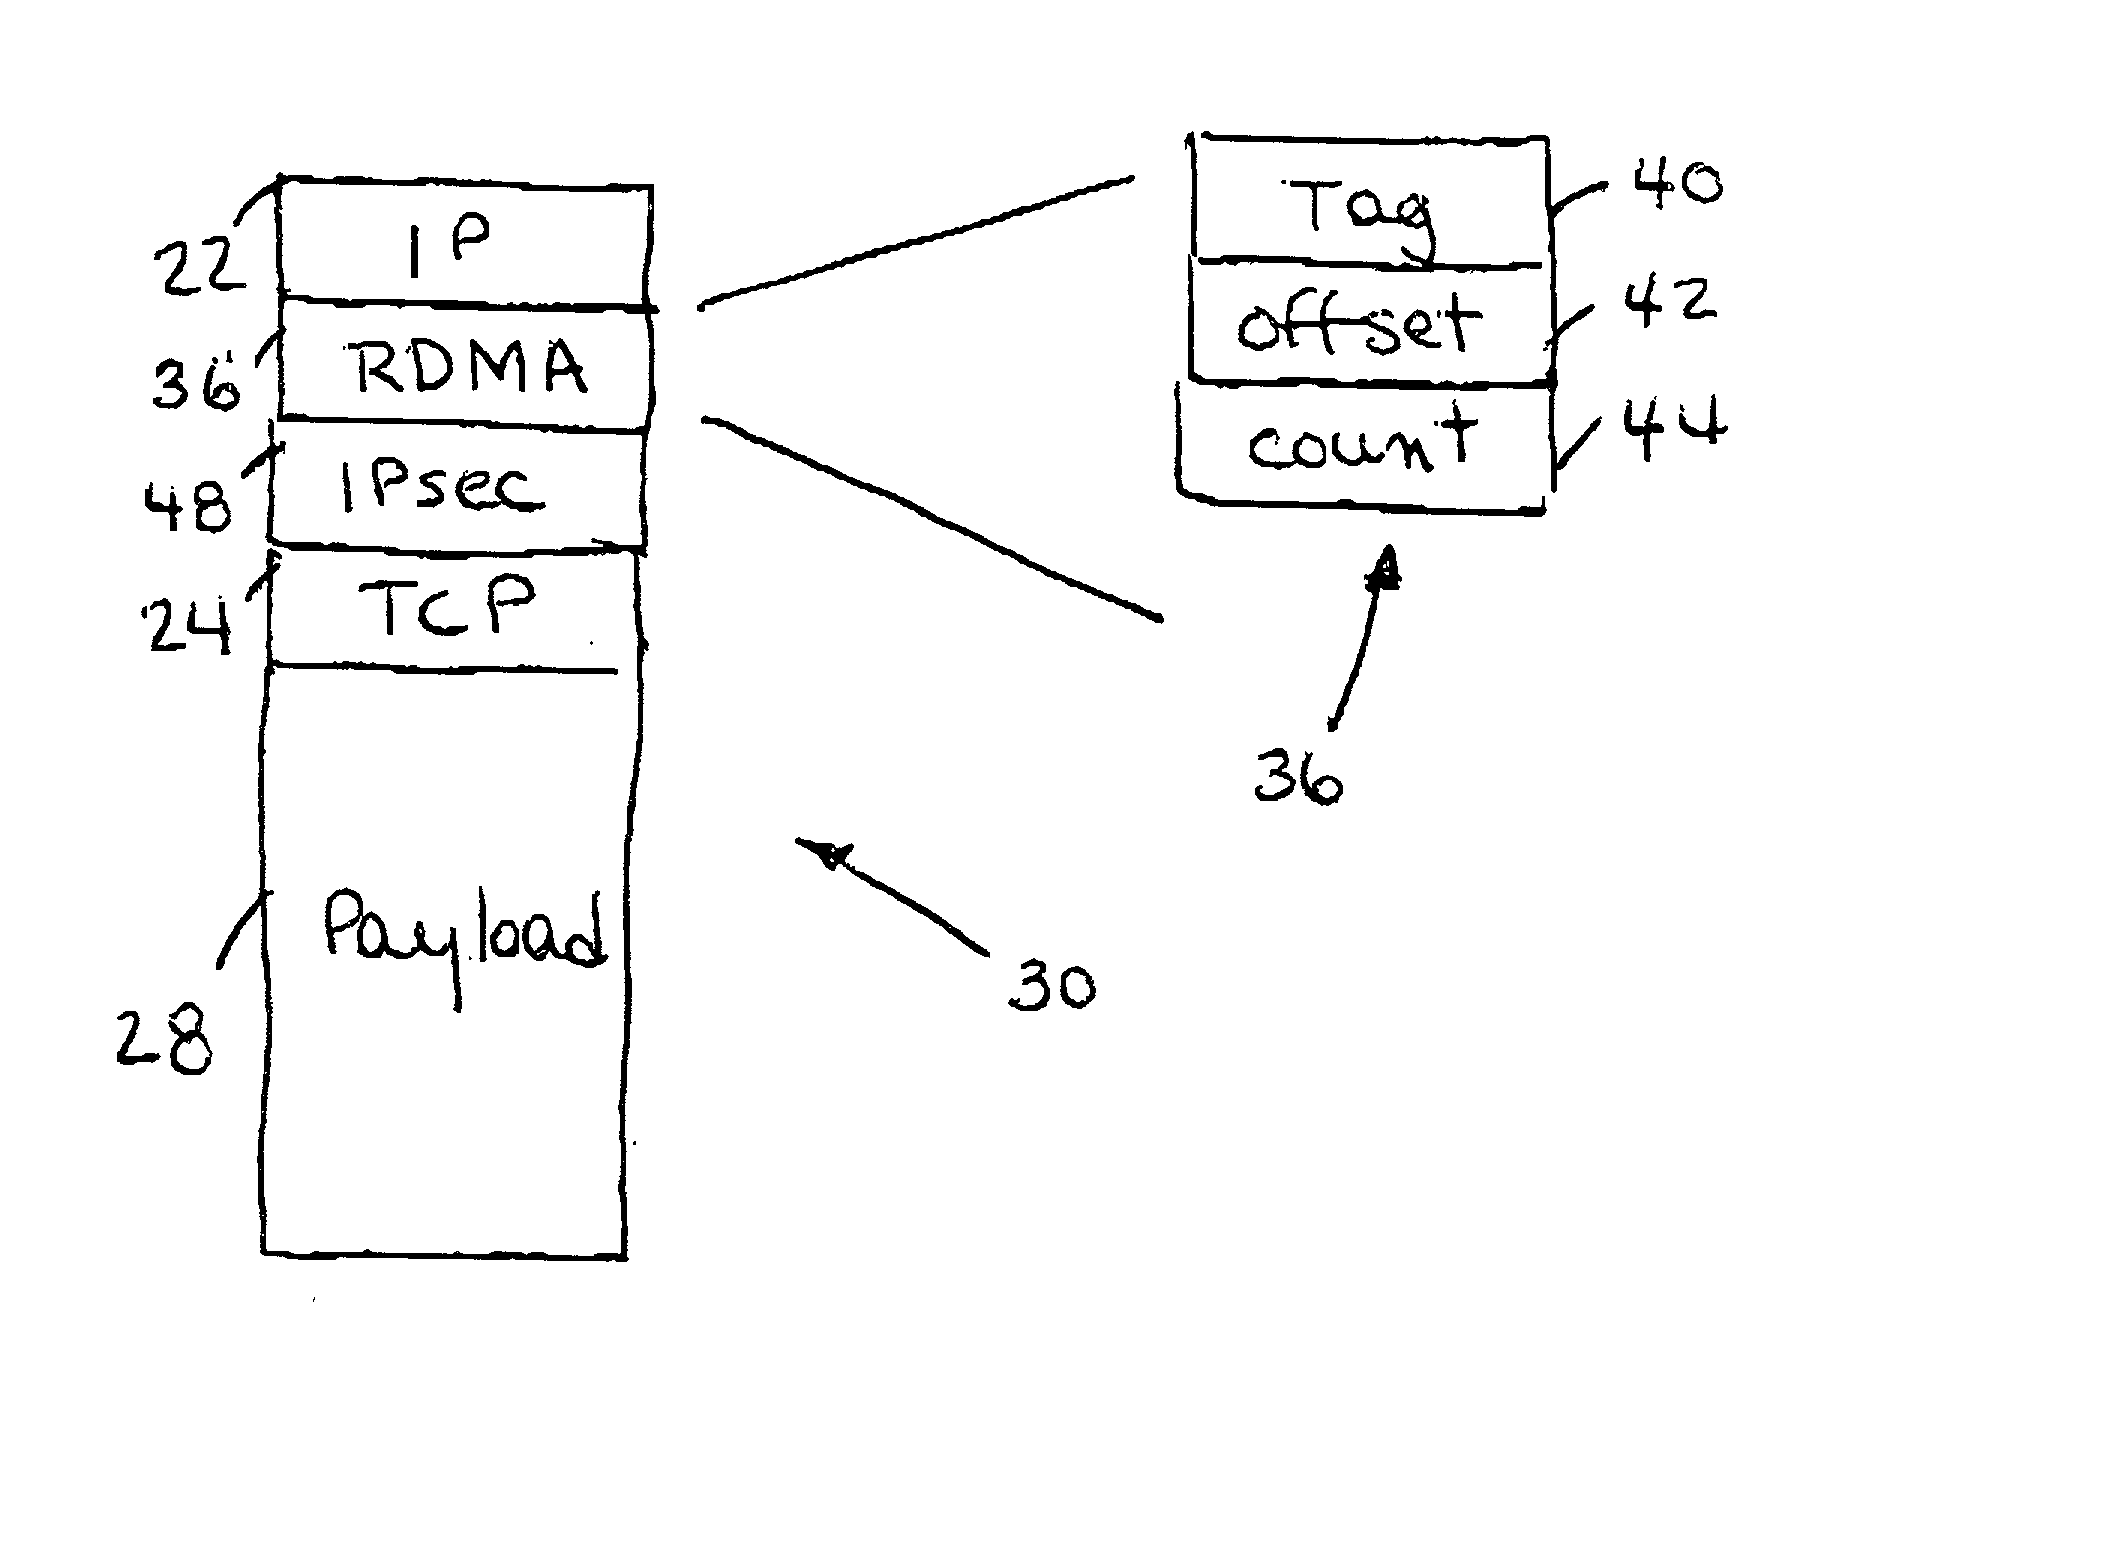 IP headers for remote direct memory access and upper level protocol framing